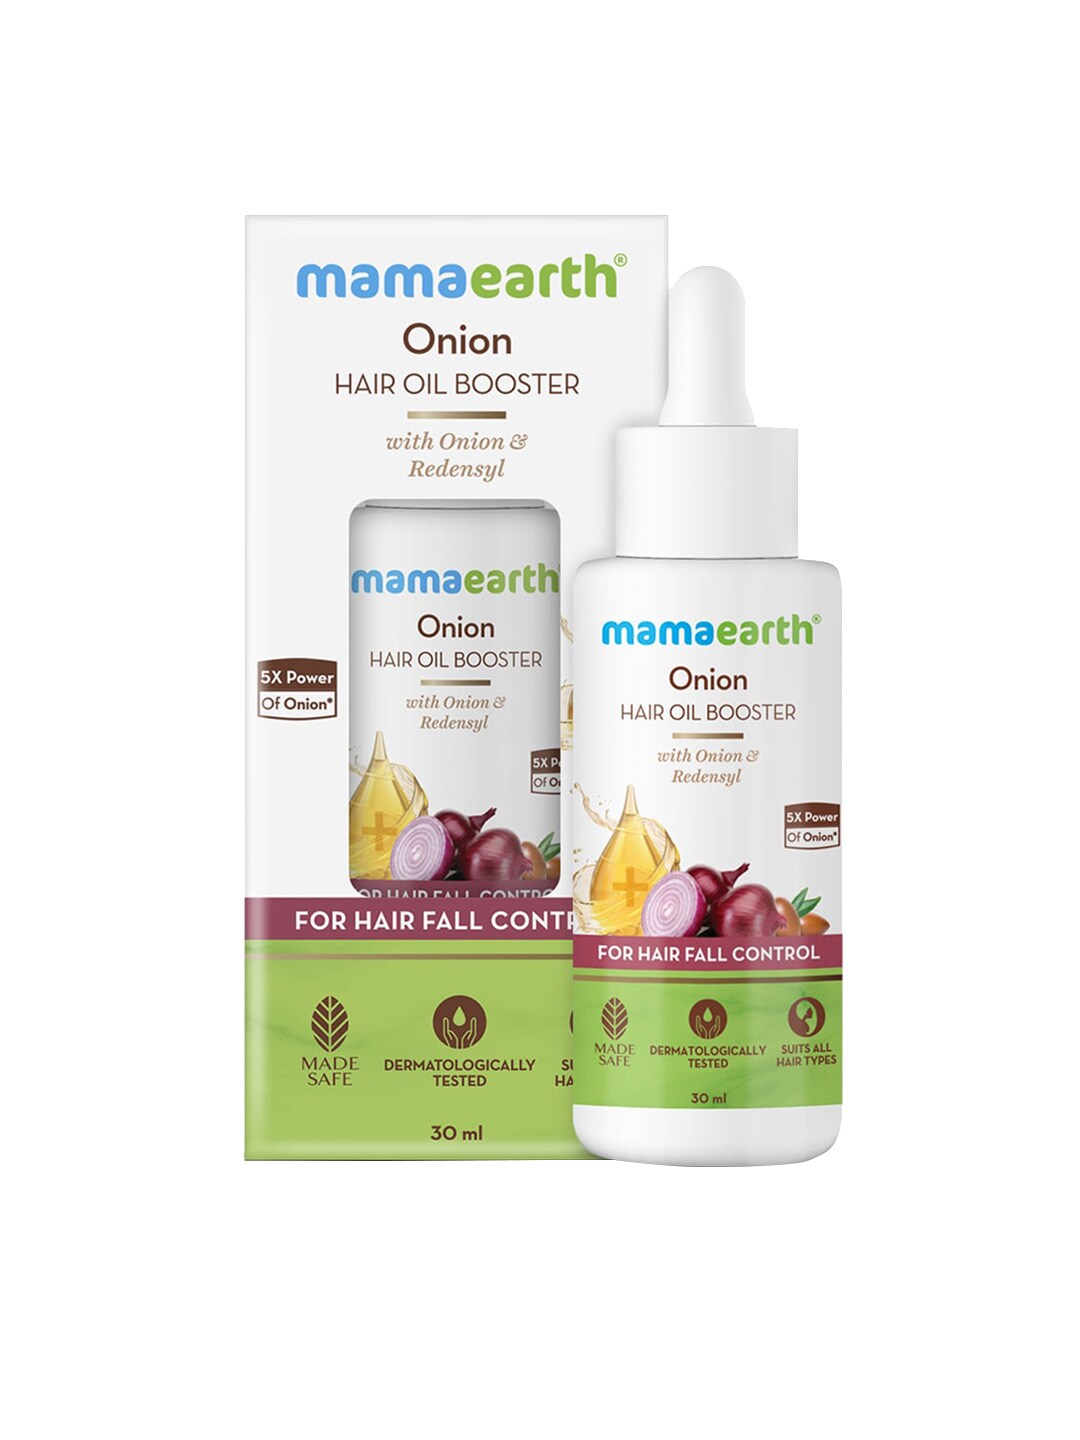 Mamaearth Onion Hair Oil Booster with Onion and Redensyl - 30 ml Price in  India, Full Specifications & Offers 